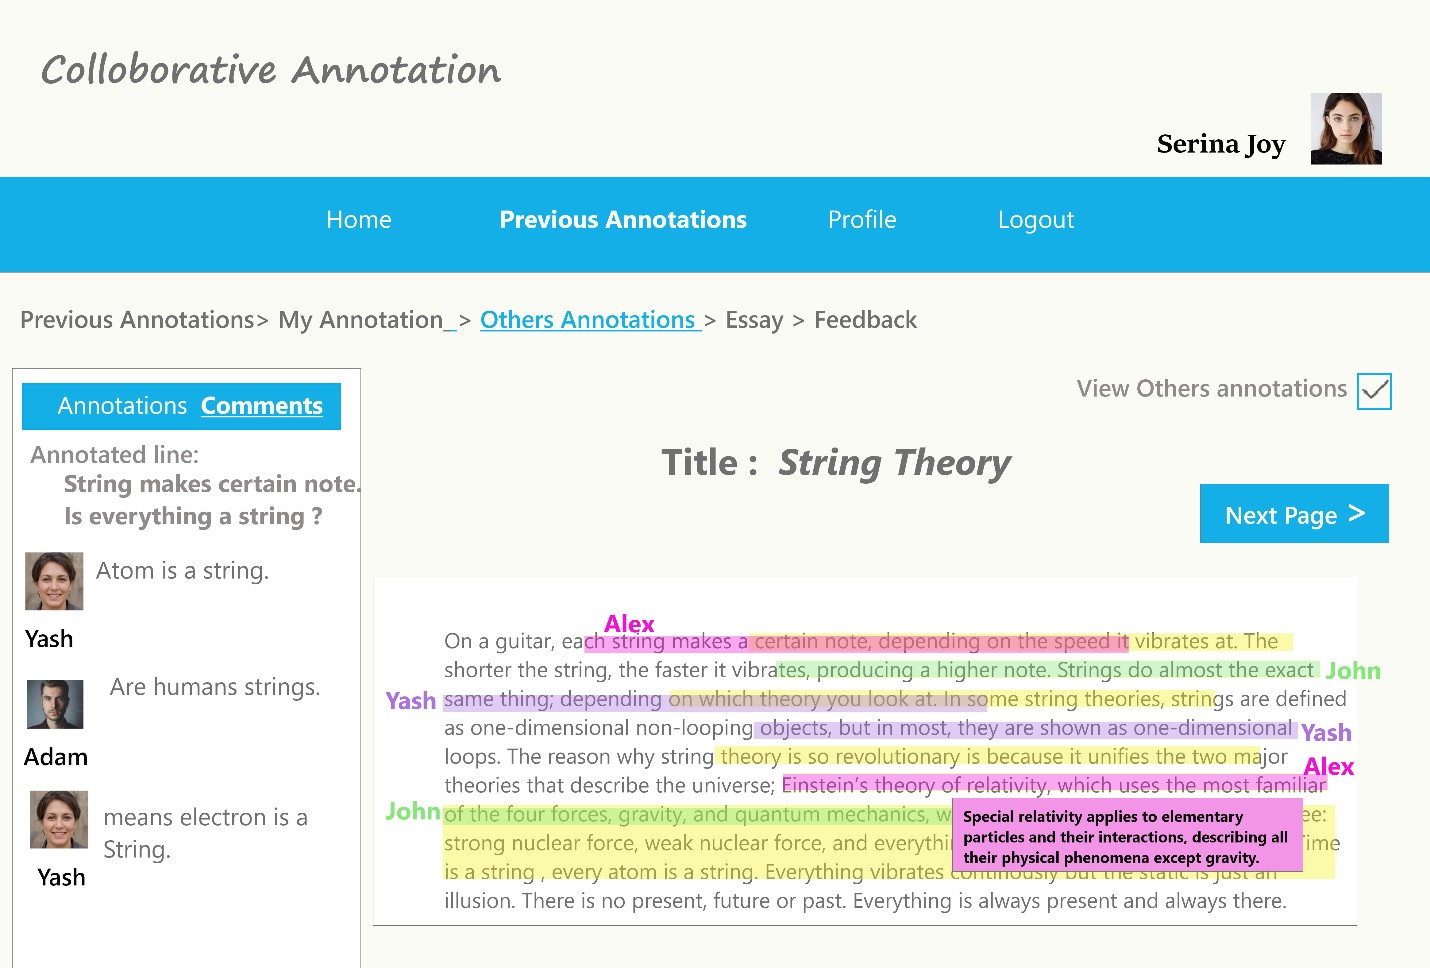 View others comments on previous annotation assignment